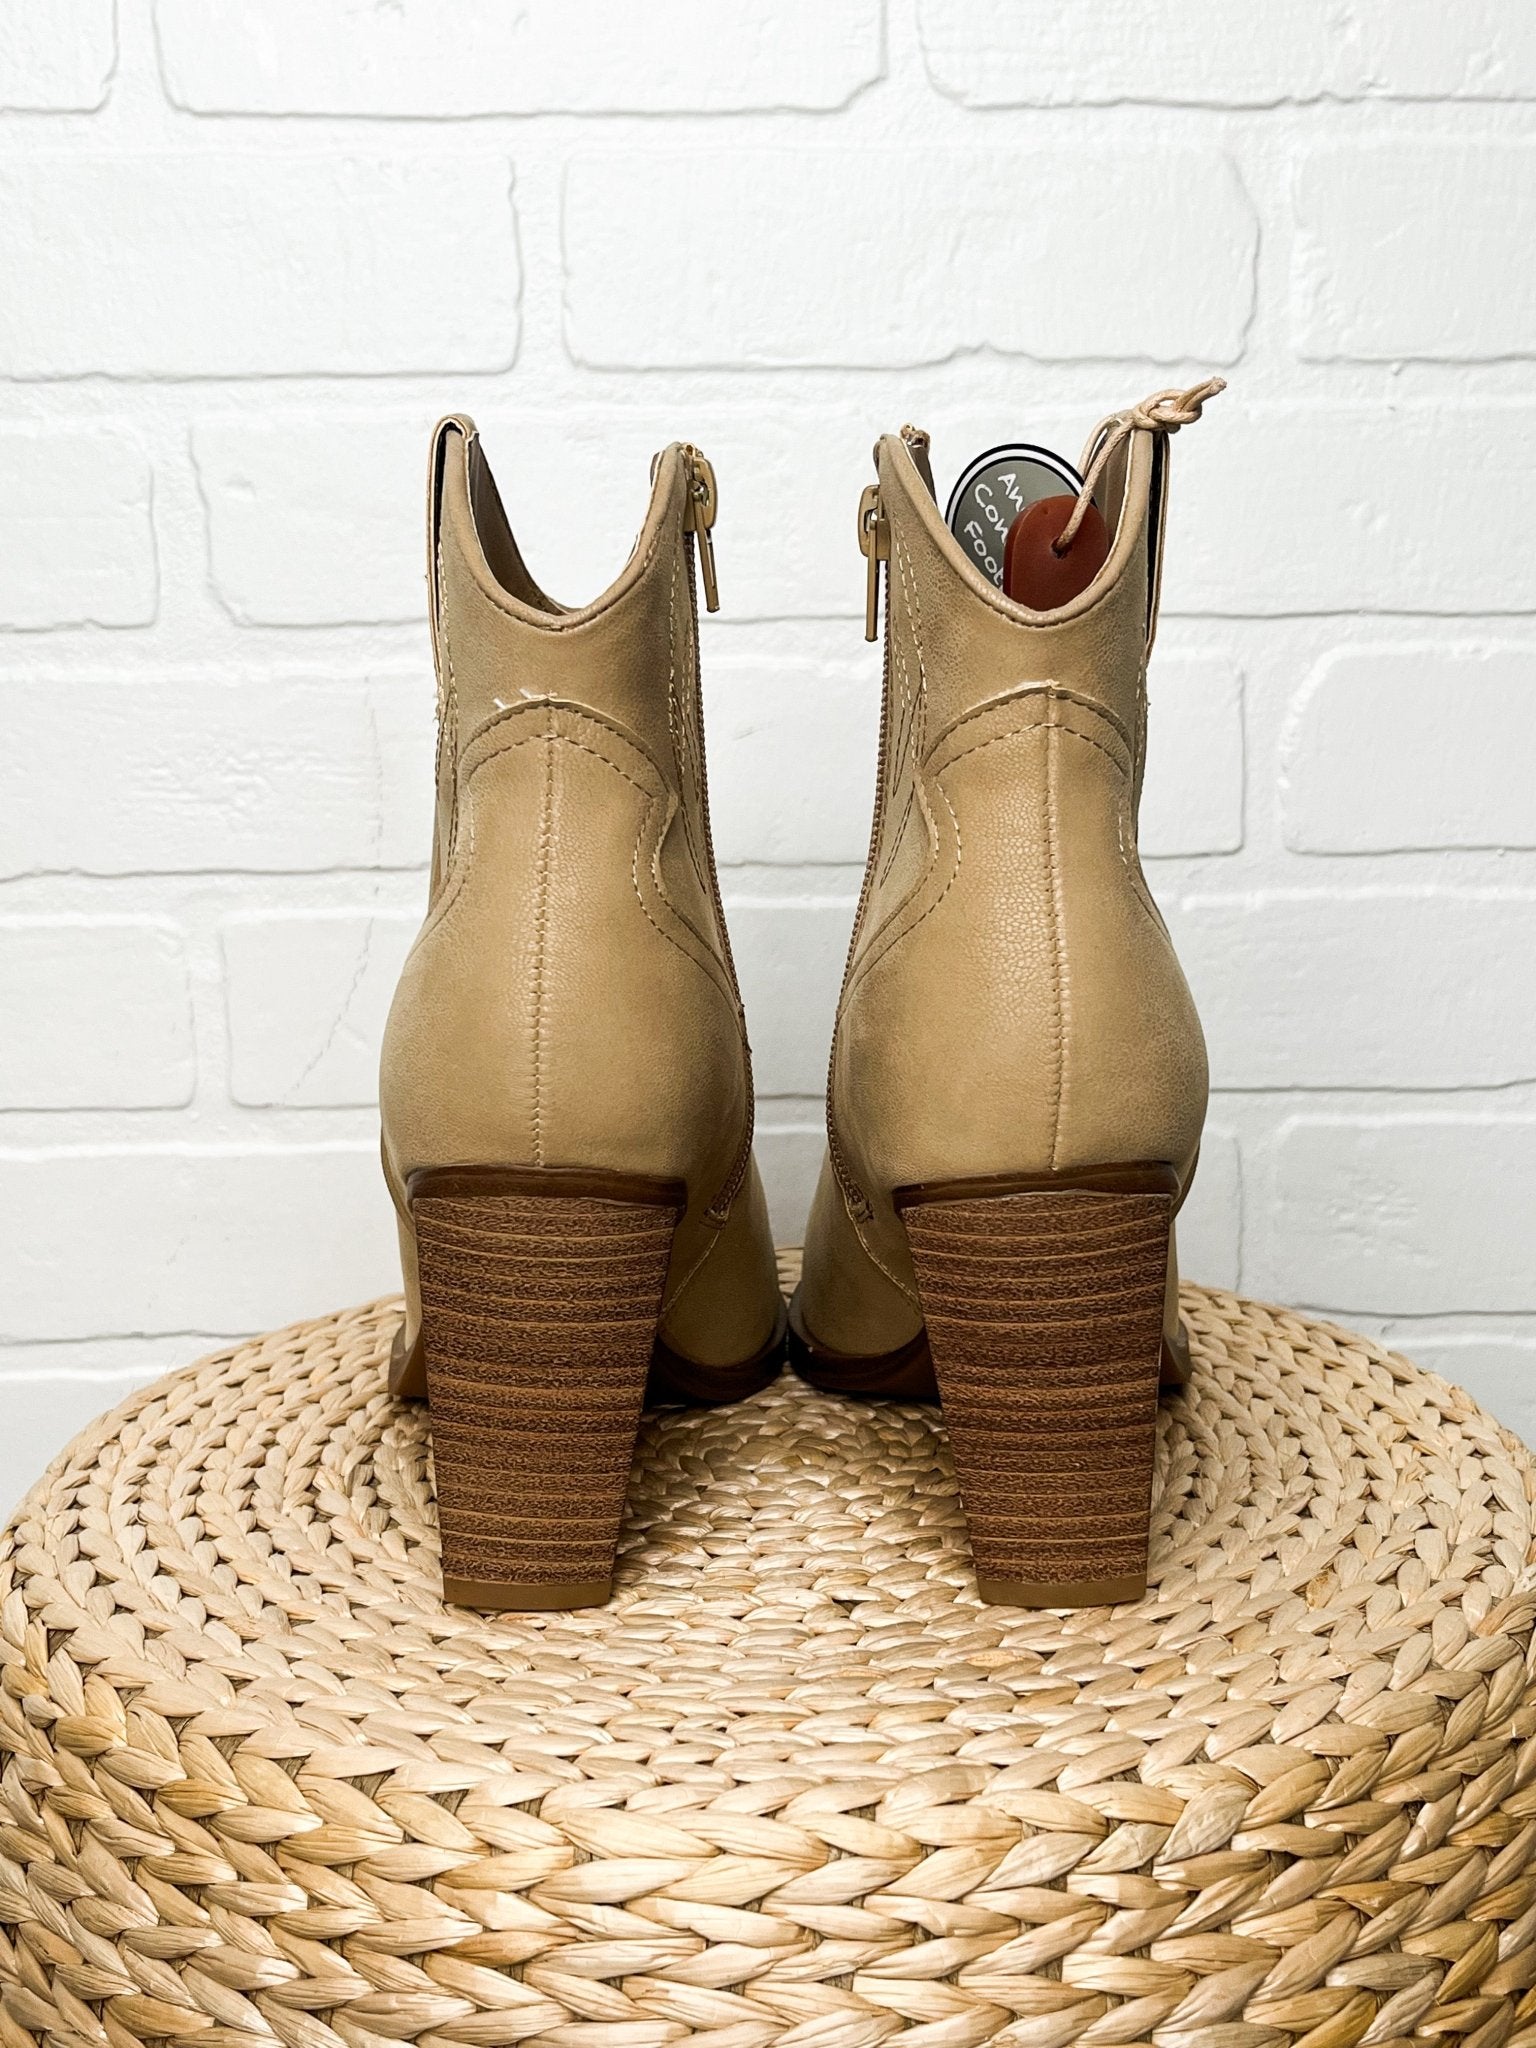 Sawyer ankle cowboy boots natural Stylish boots - Womens Fashion Shoes at Lush Fashion Lounge Boutique in Oklahoma City